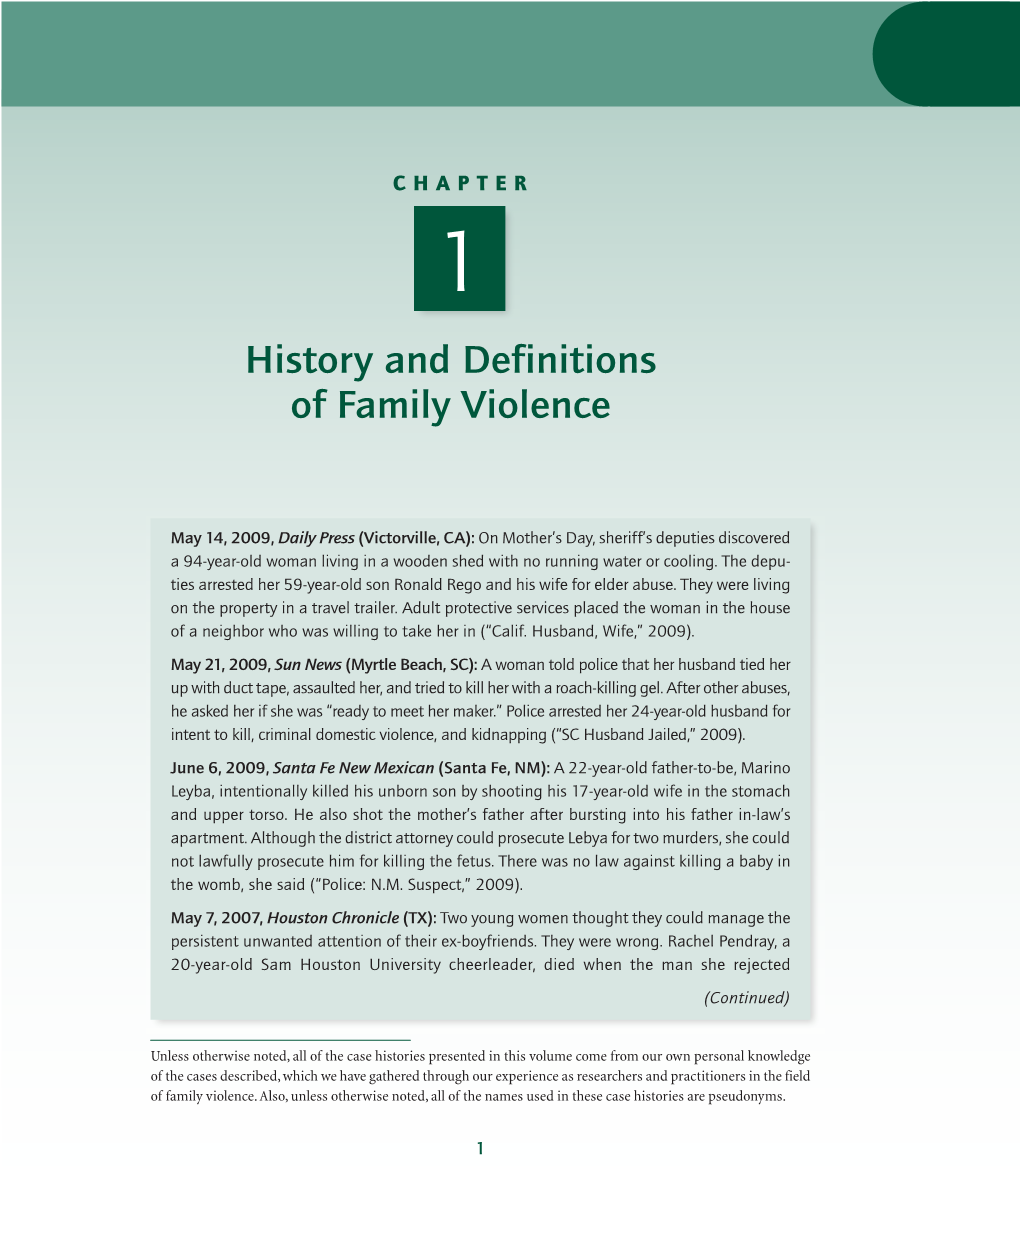 CHAPTER 1 History and Definitions of Family Violence